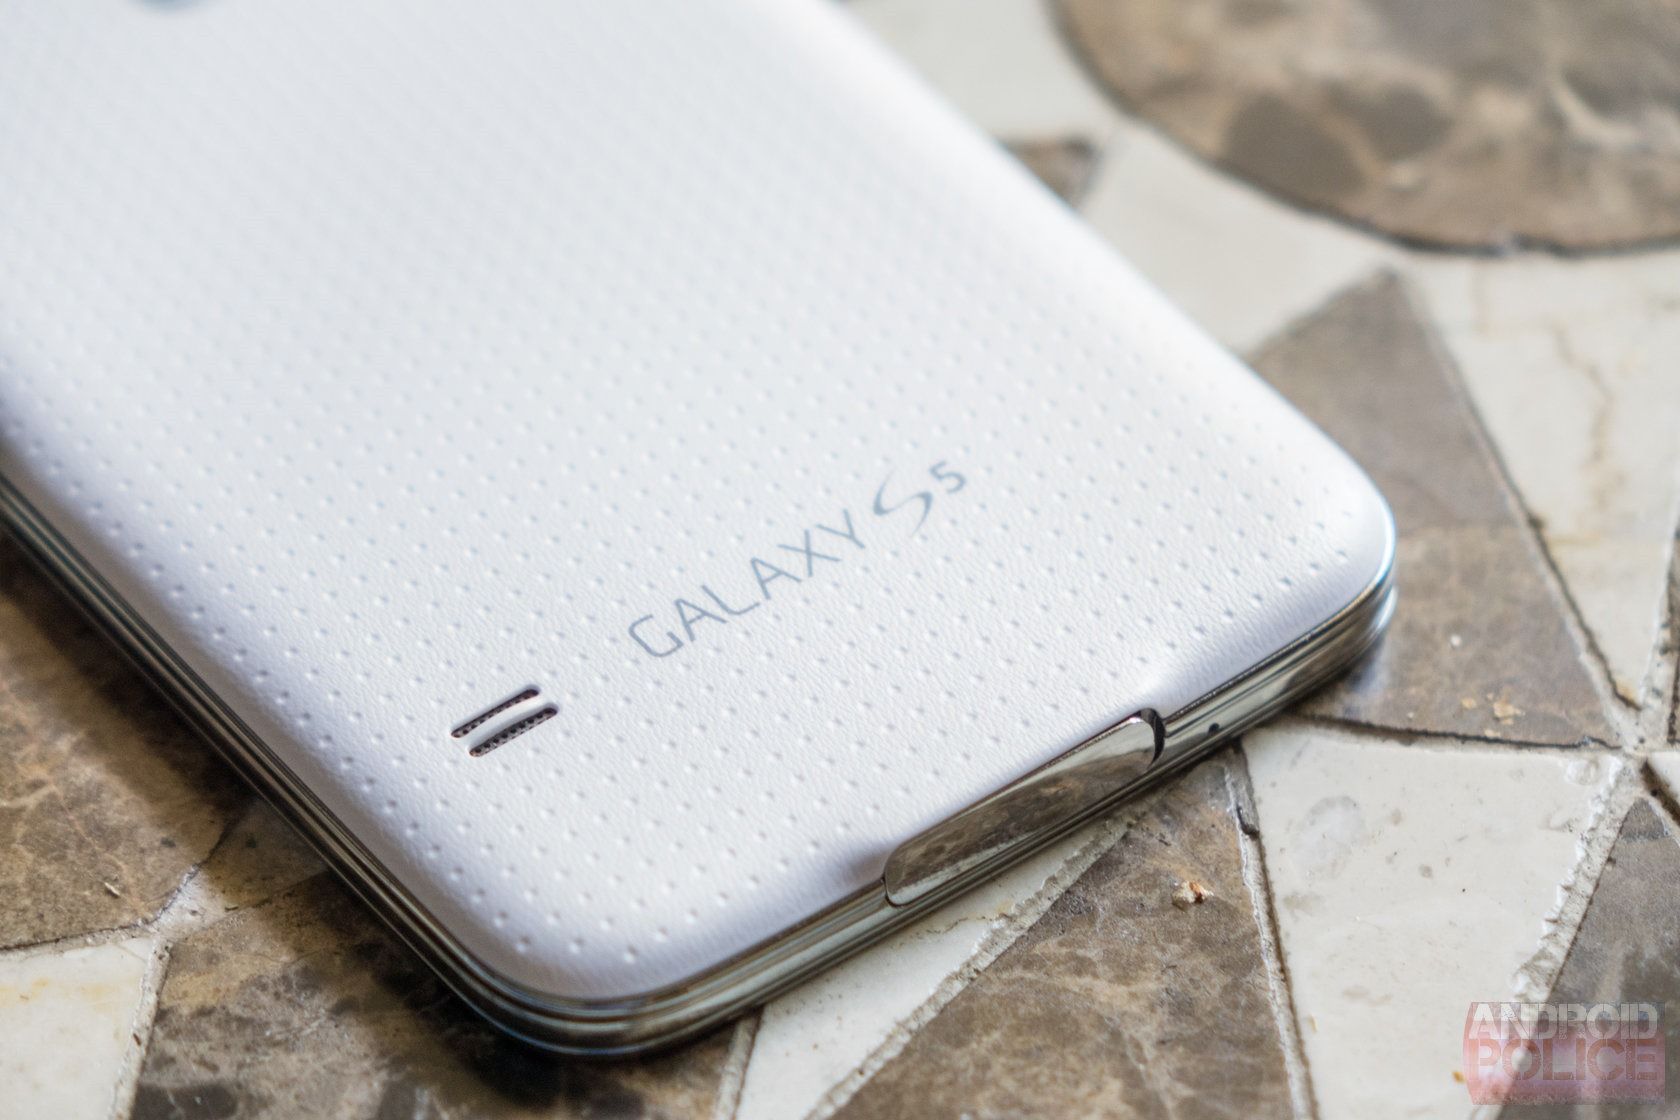 The dimpled back panel of the Samsung Galaxy S5 